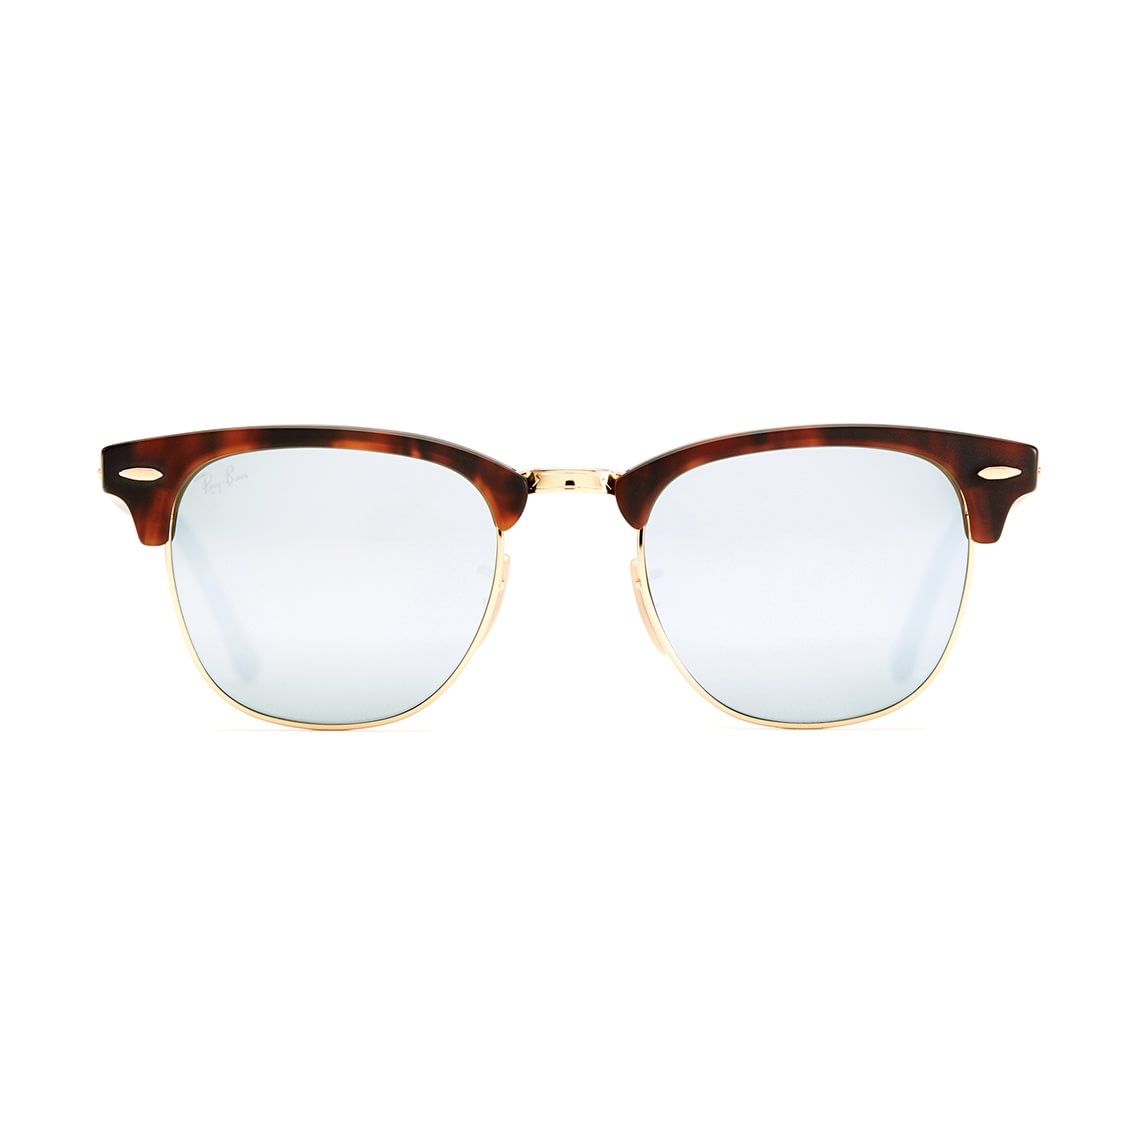 Ray-Ban Clubmaster RB3016 114530 51